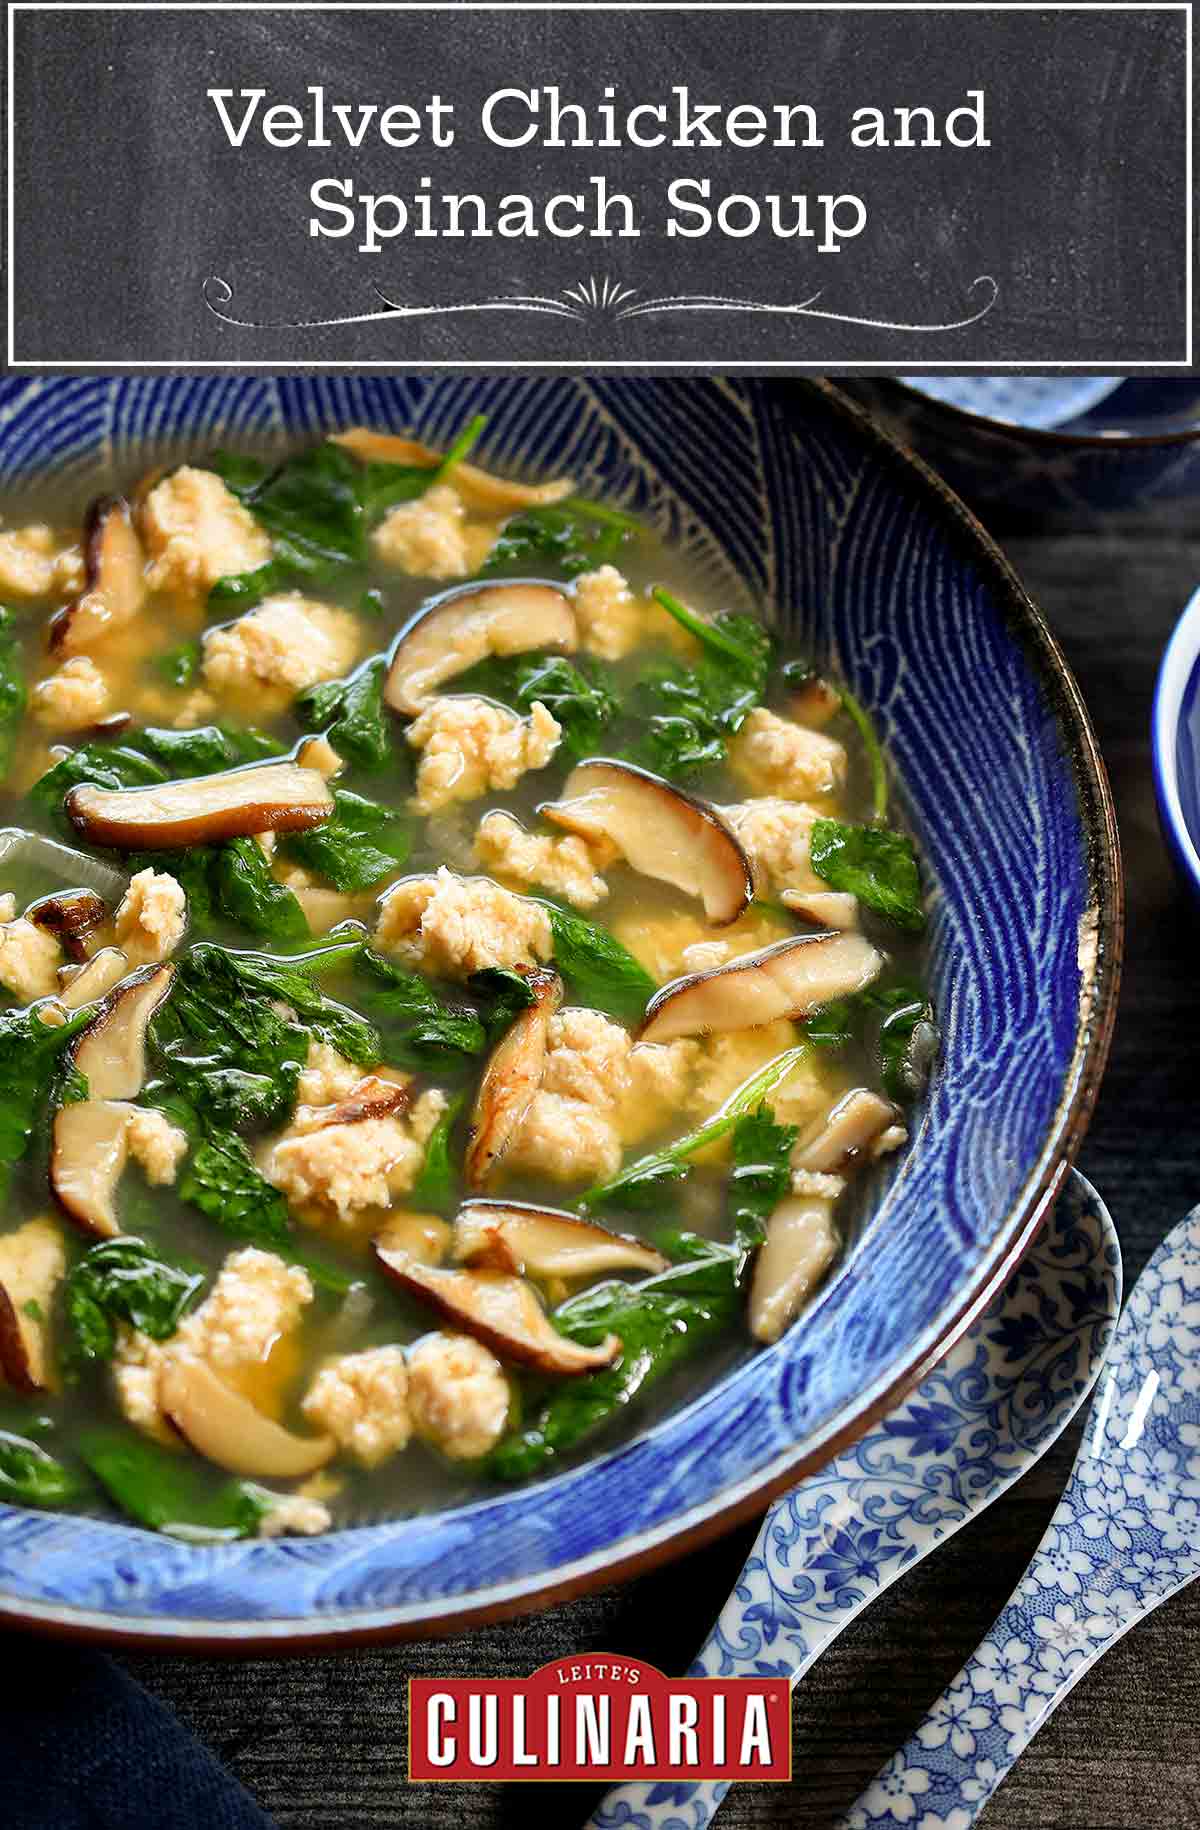 A blue and white bowl filled with velvet chicken and spinach soup